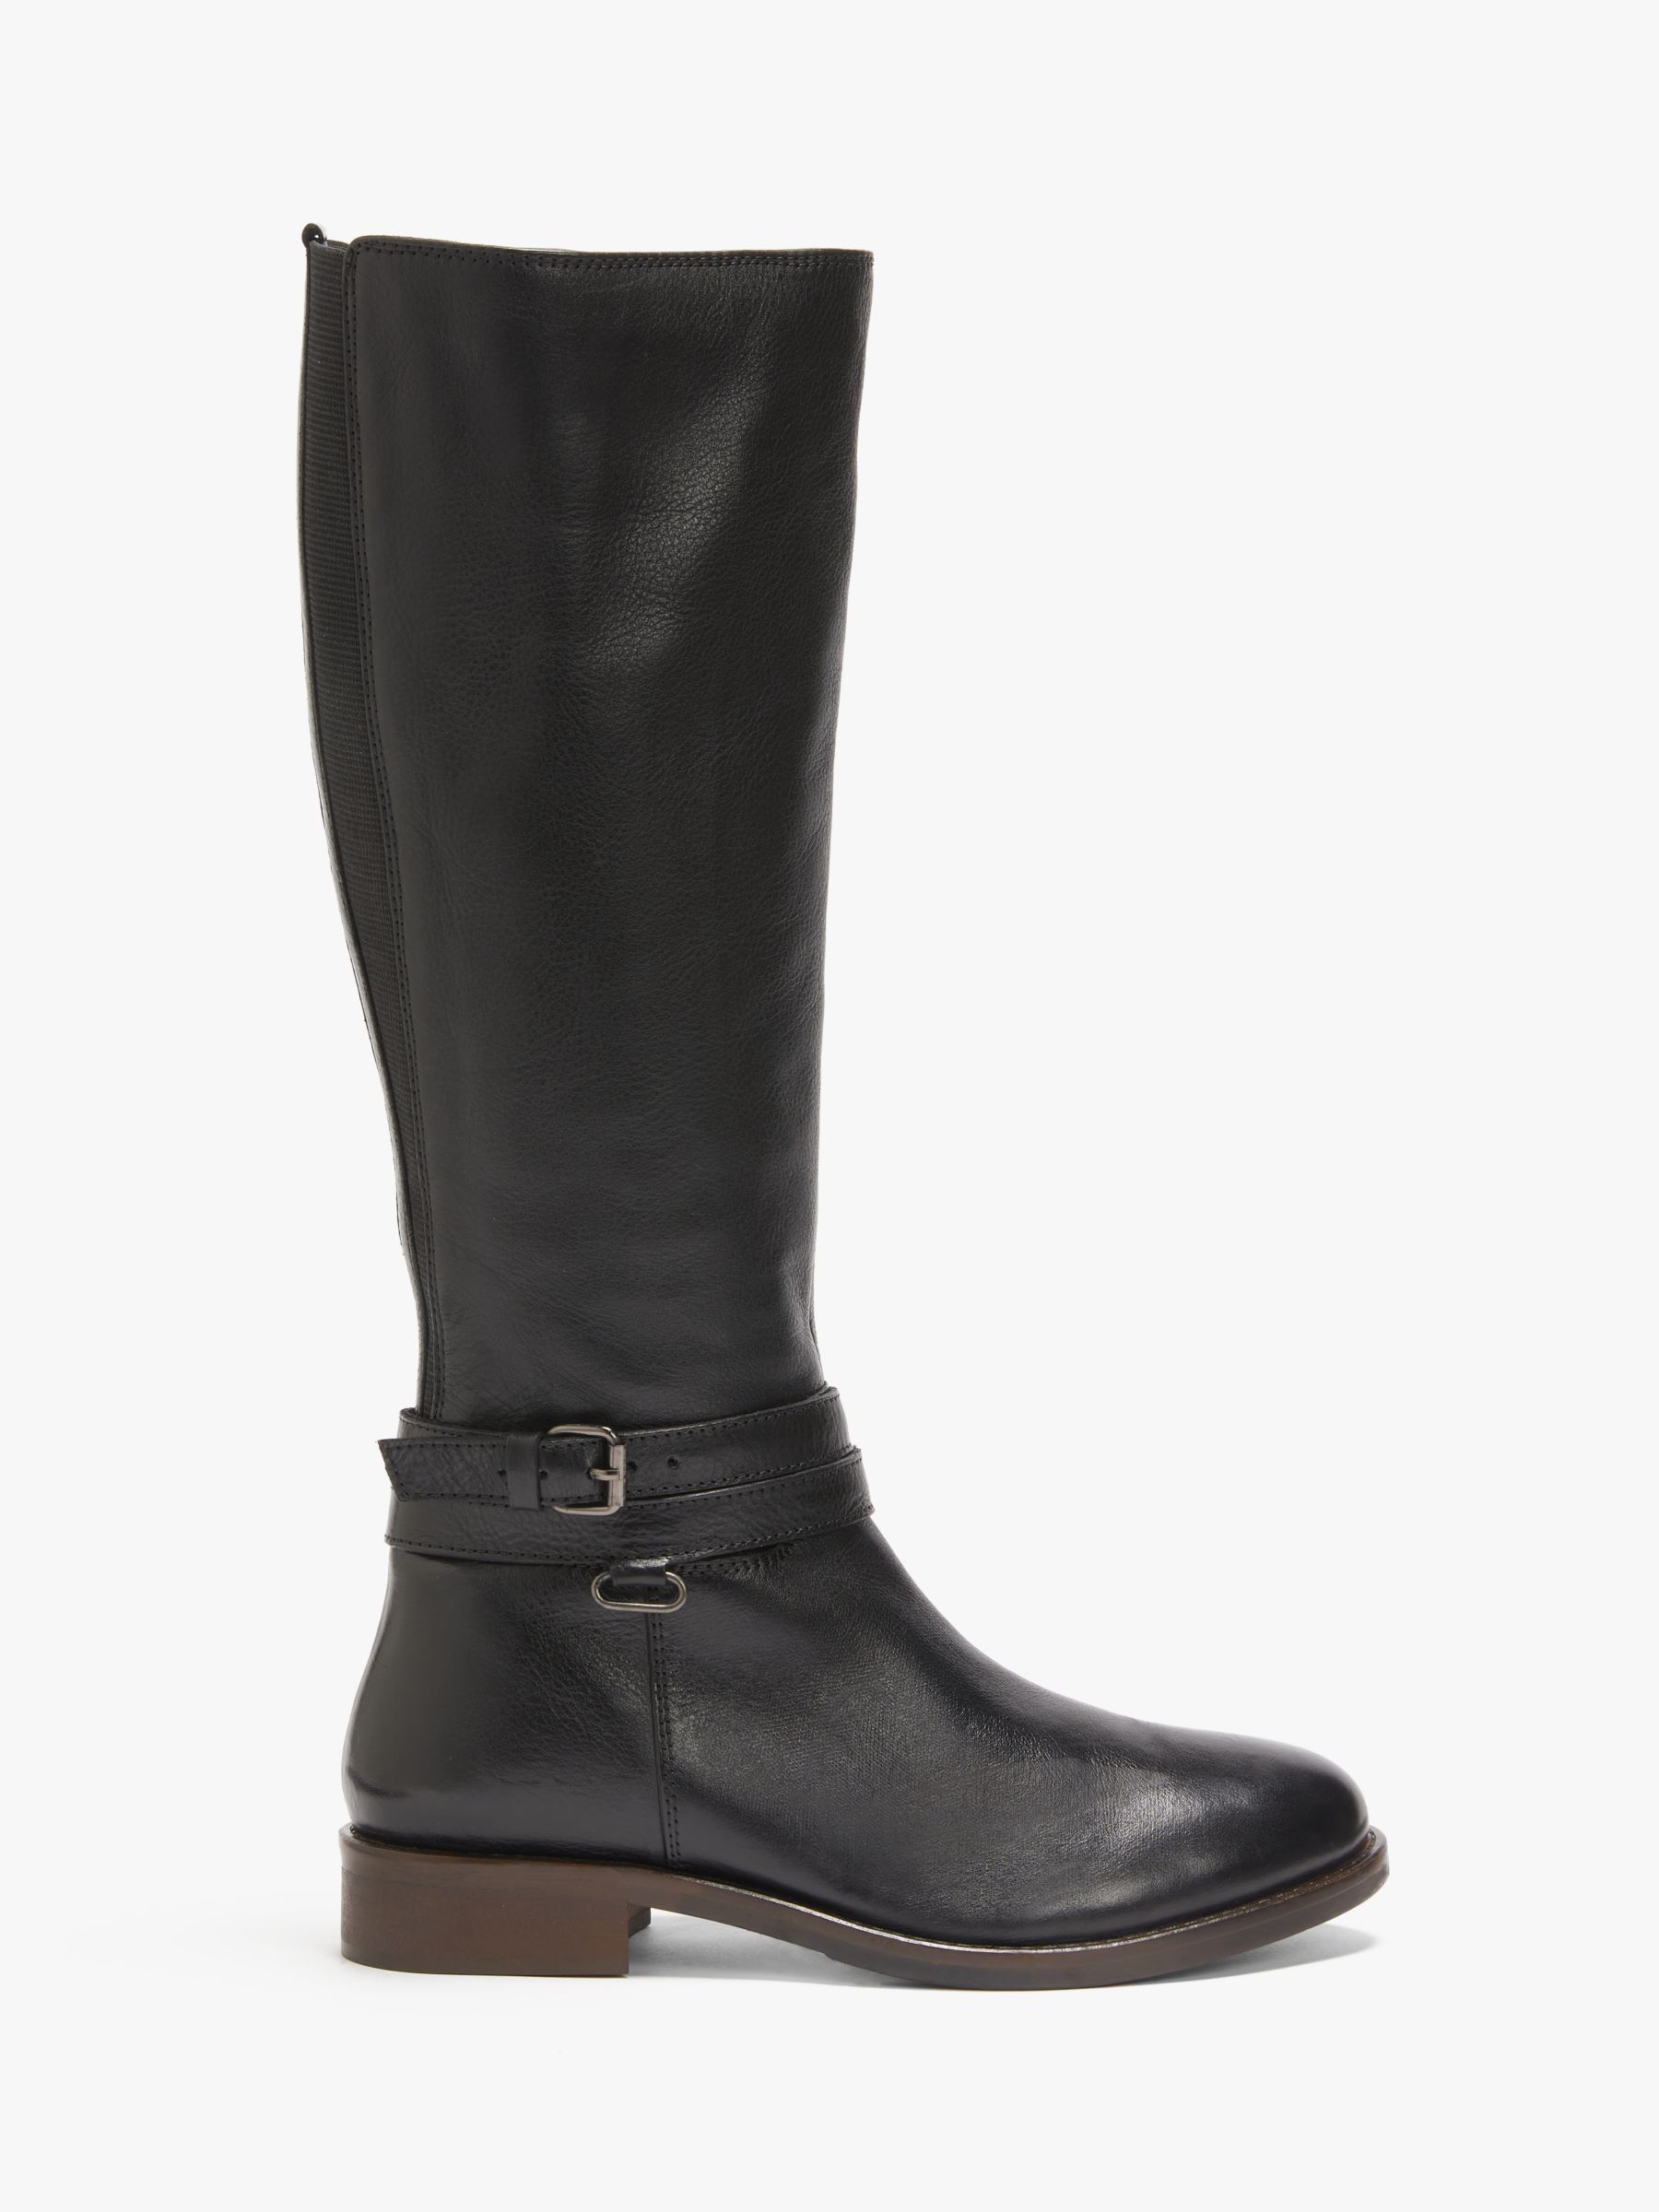 John Lewis Storrie Wide Fit Leather Knee High Boots